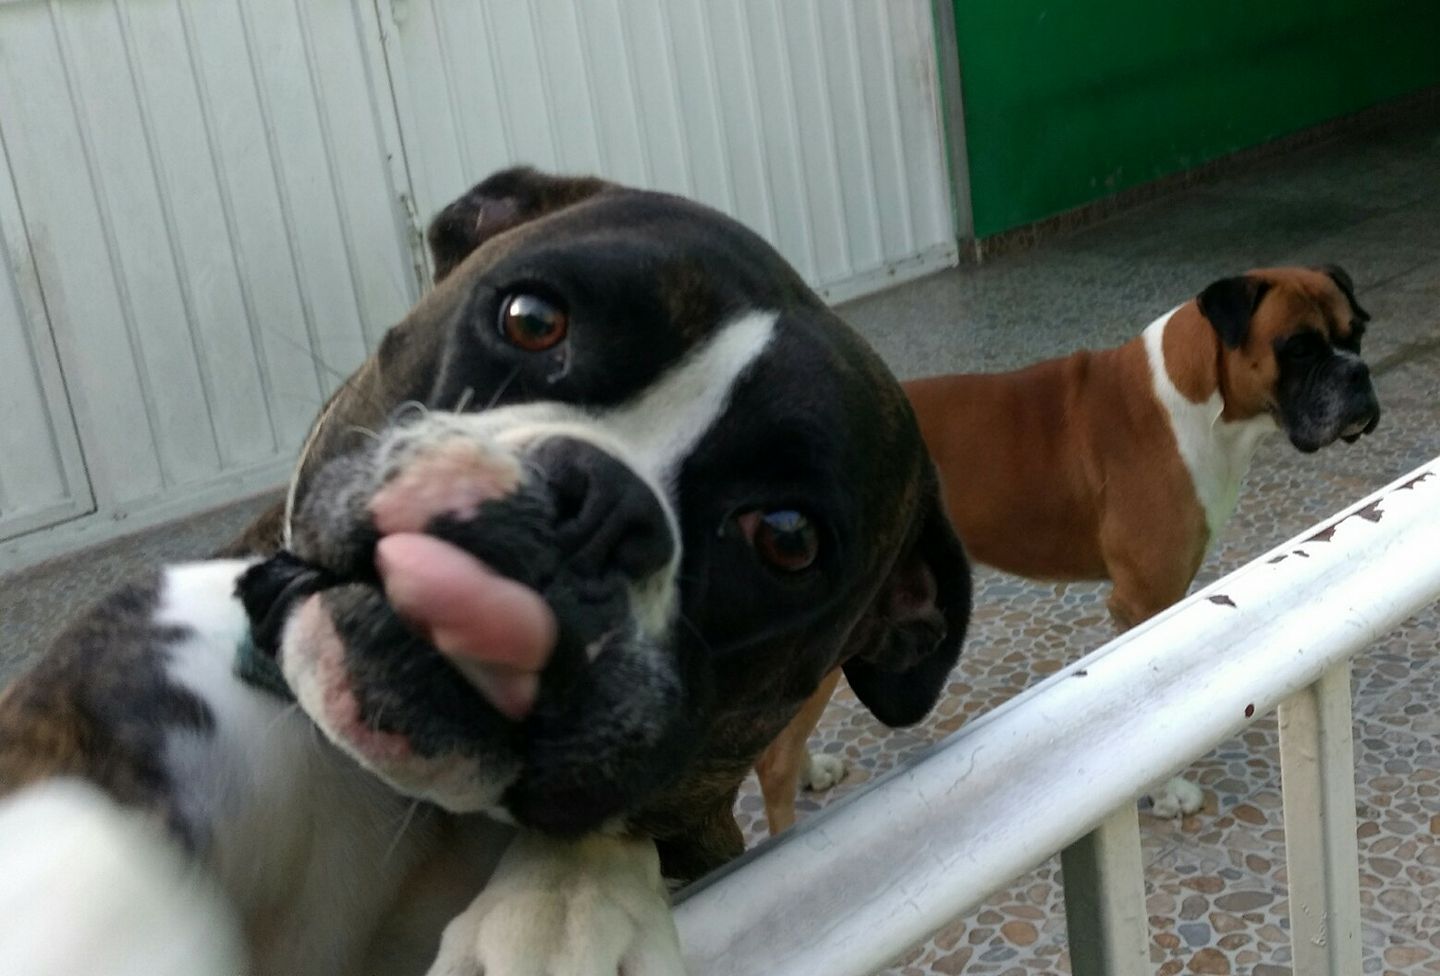 A Boxer Dog leaning towards the fence while sticking its tongue out